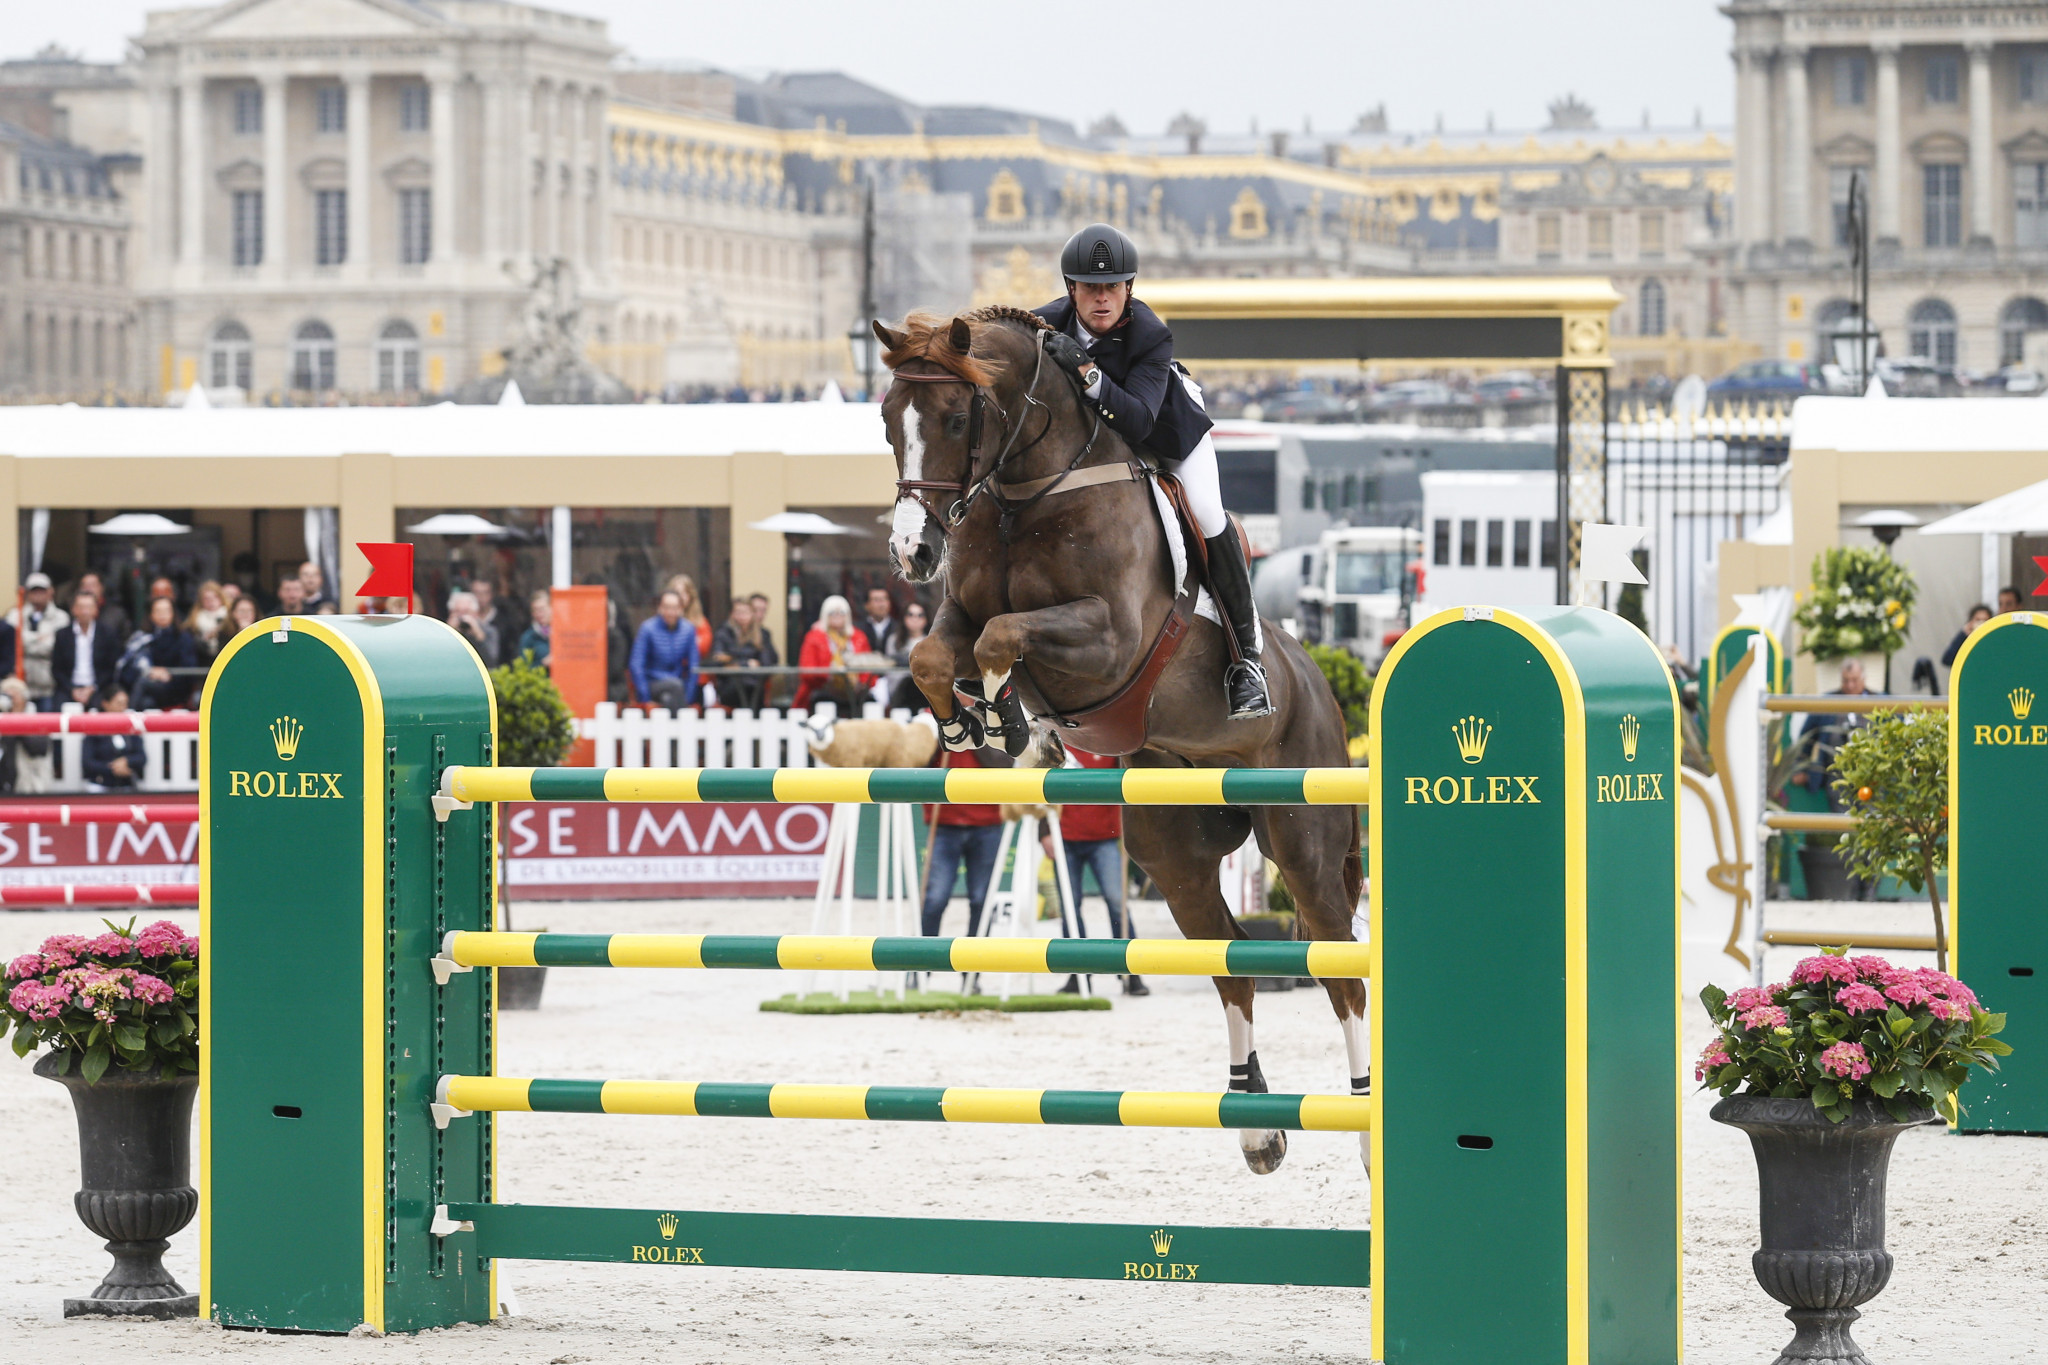 FEI Bureau unanimously supports confirmation of Paris 2024 equestrian events in Versailles